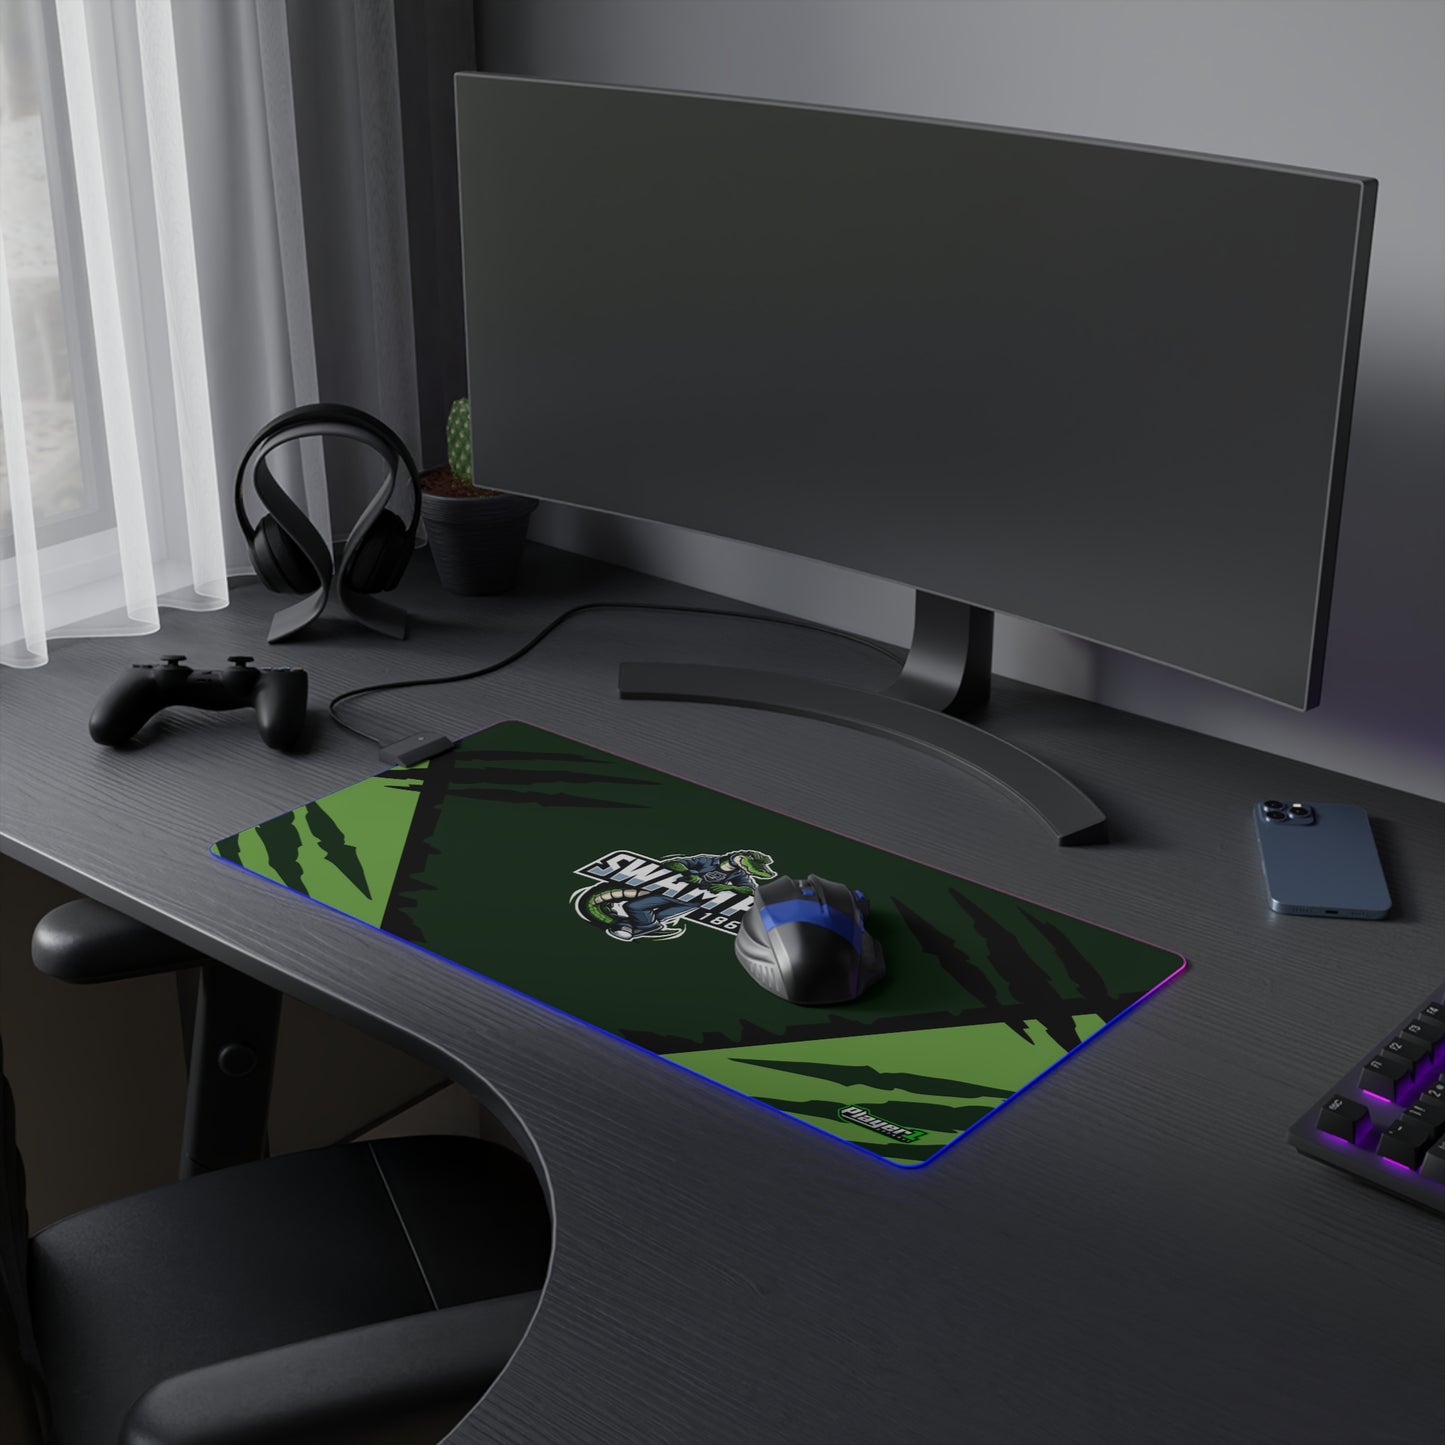 Swampy LED Gaming Mouse Pad